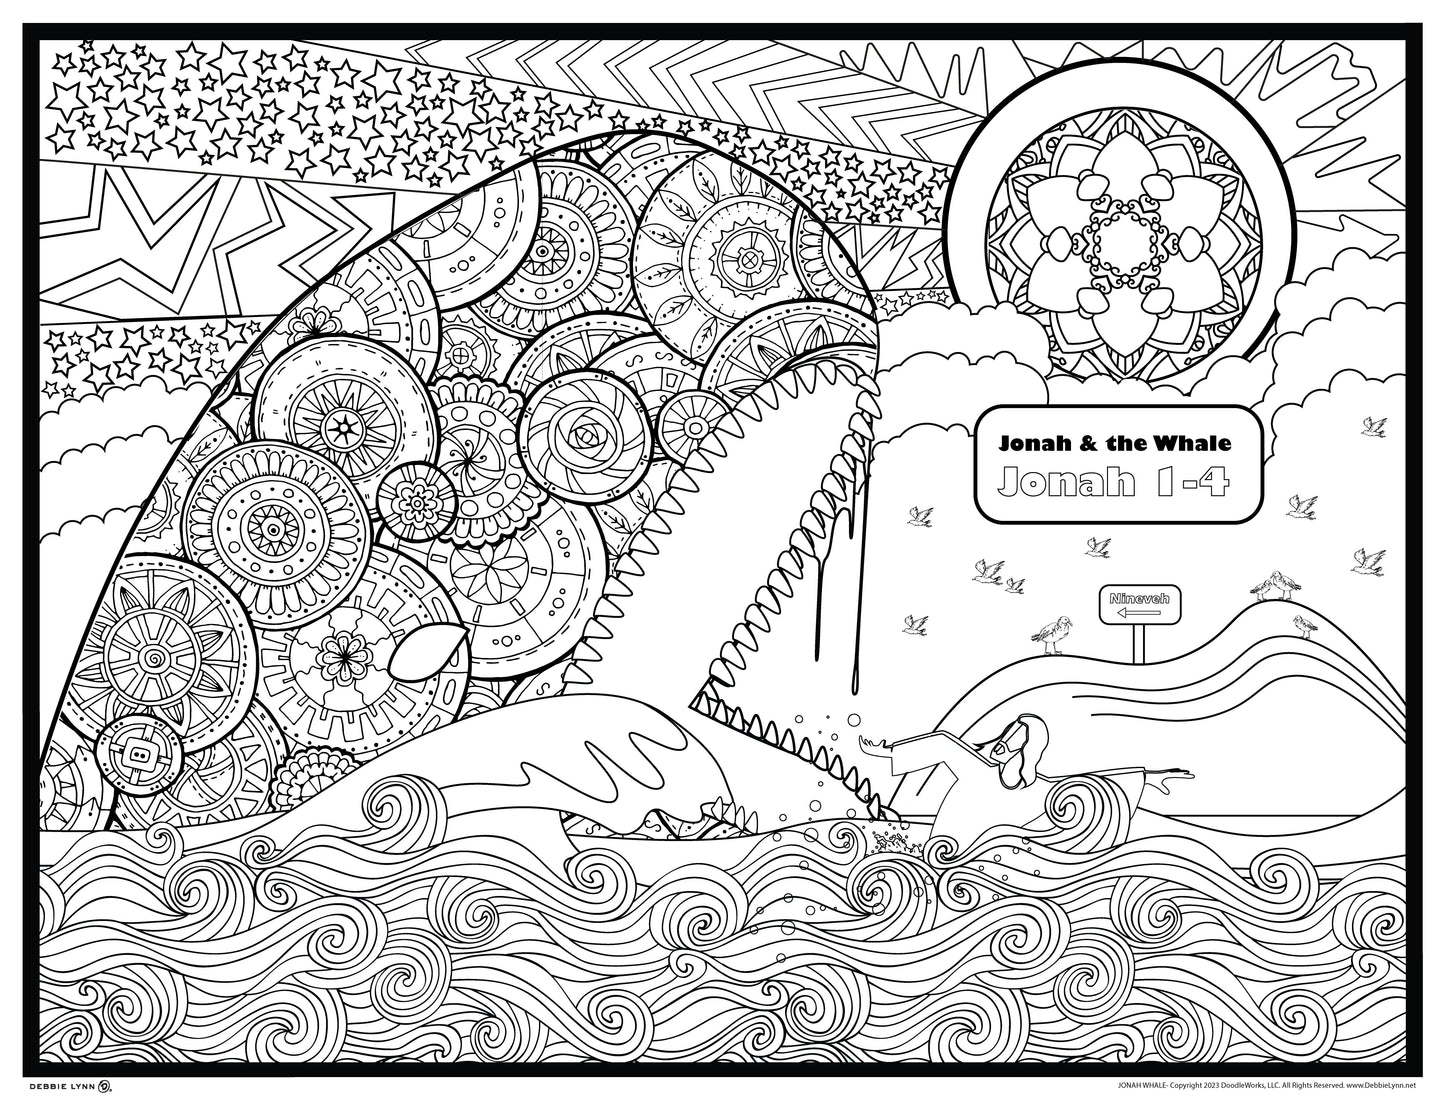 JONAH AND THE WHALE-FAITH PERSONALIZED GIANT COLORING POSTER 46"x60"